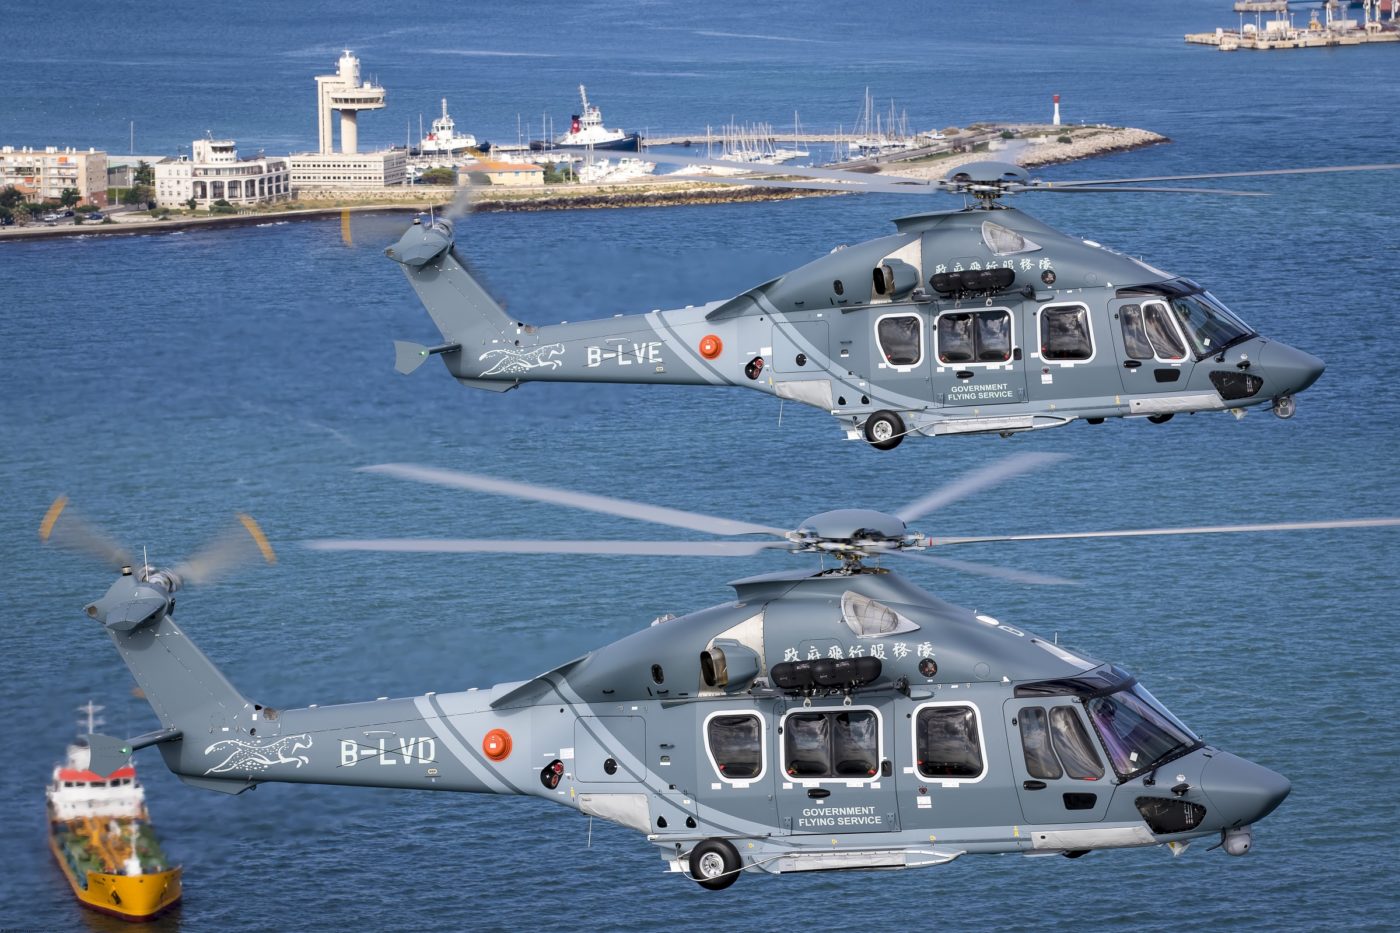 GFS’s new H175s will progressively replace its current fleet of AS332 L2 and H155 helicopters.